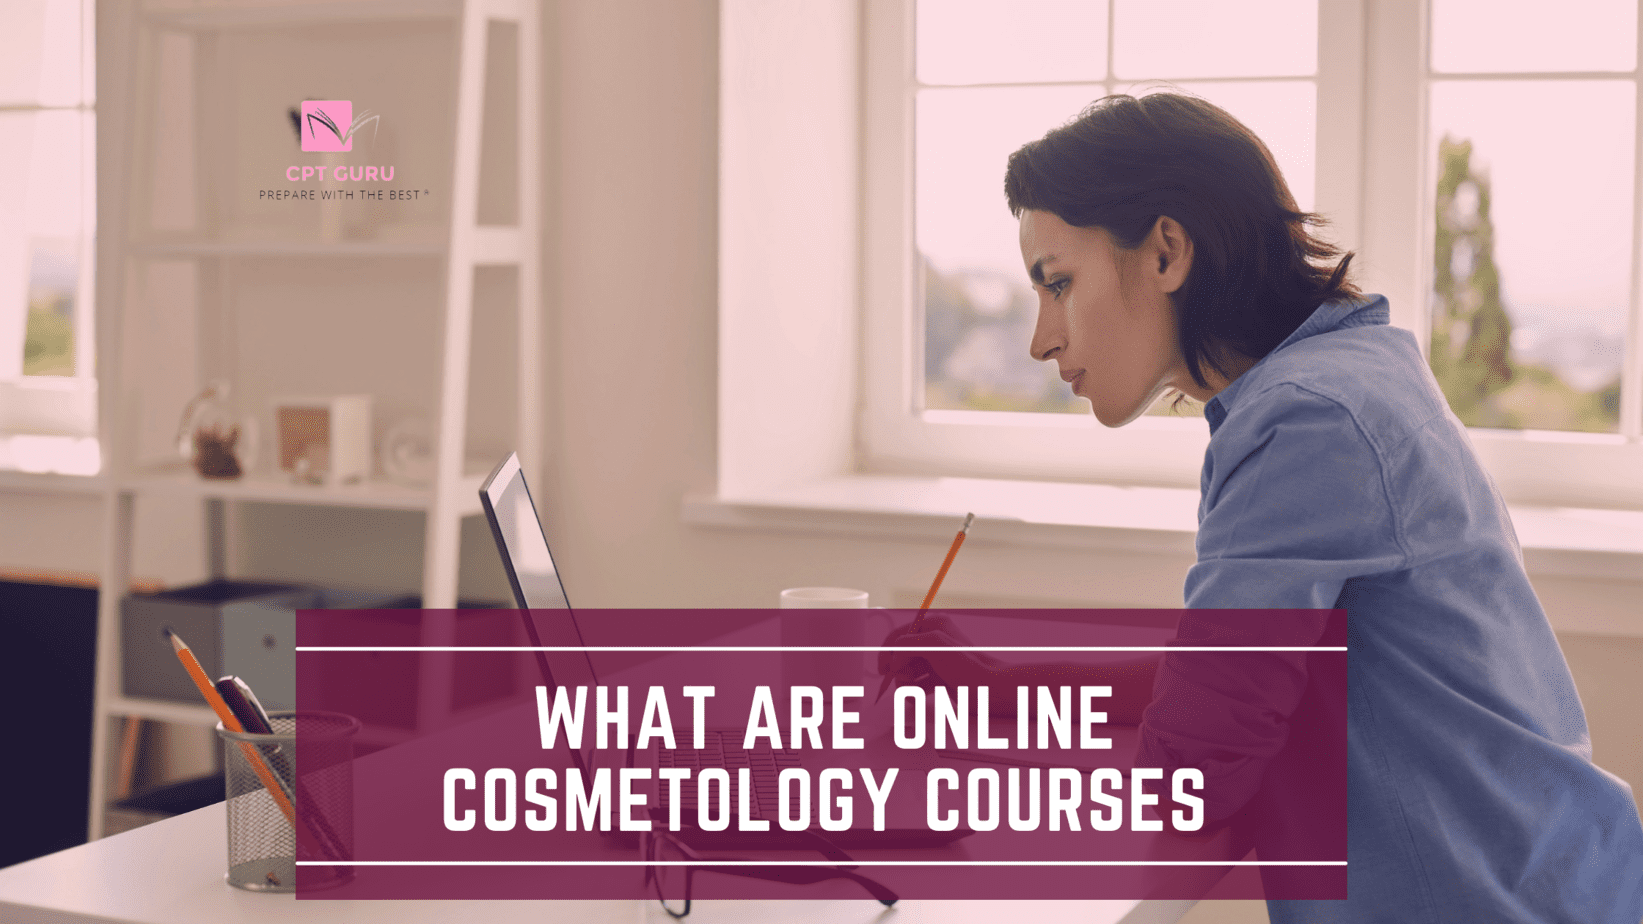 ONLINE COSMETOLOGY COURSES